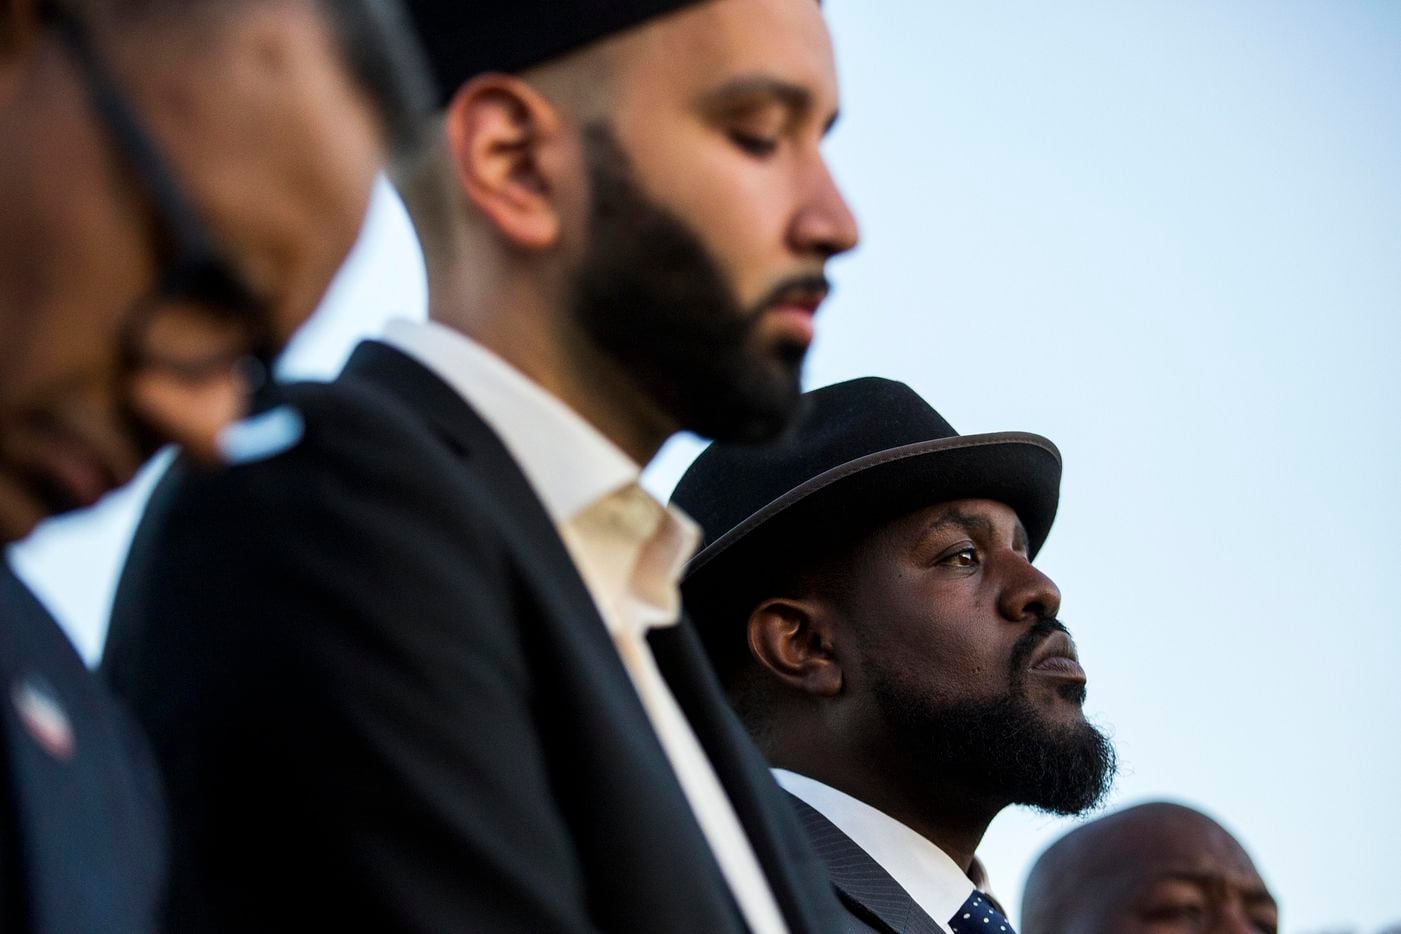 Dr. Michael W. Waters (right) and Imam Omar Suleiman (center) listen to a speaker during the...